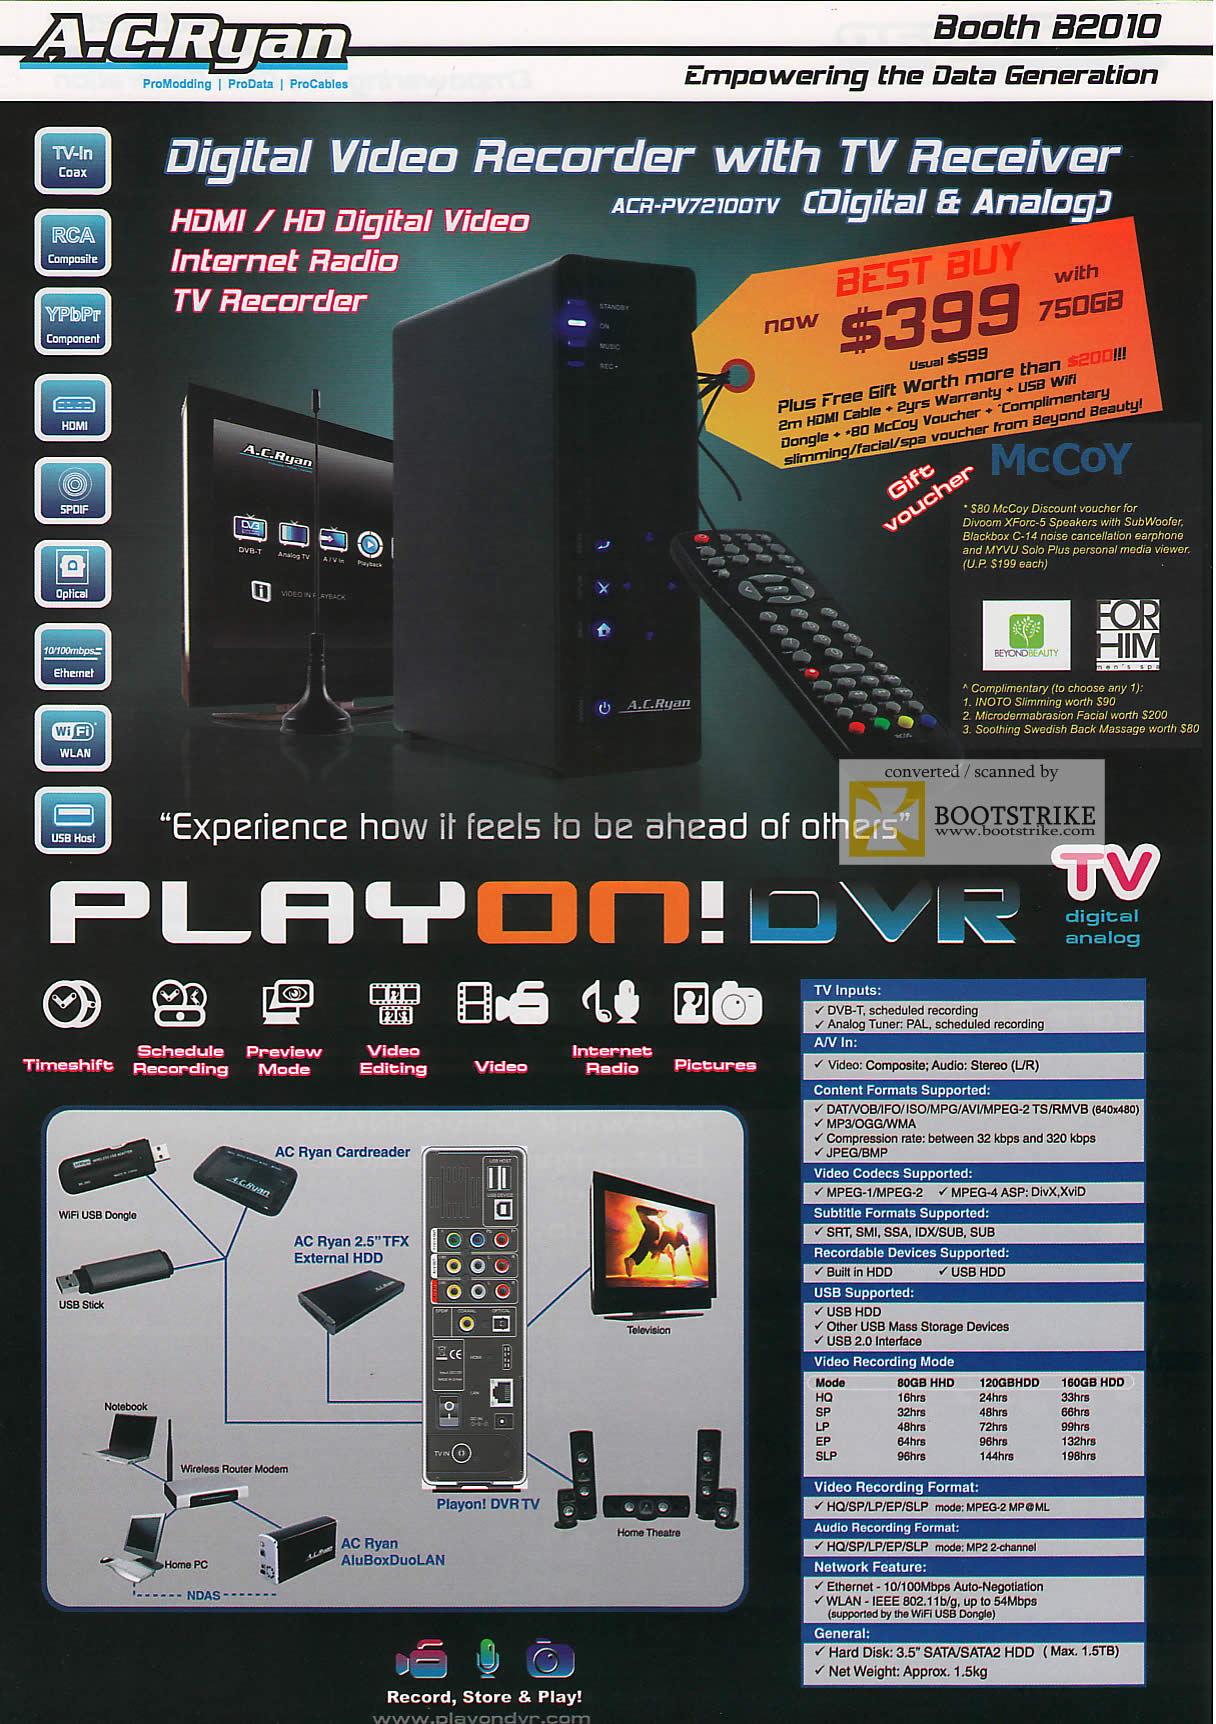 PC Show 2009 price list image brochure of AC Ryan Digital Video Recorder With TV Receiver PlayOn DVR TV